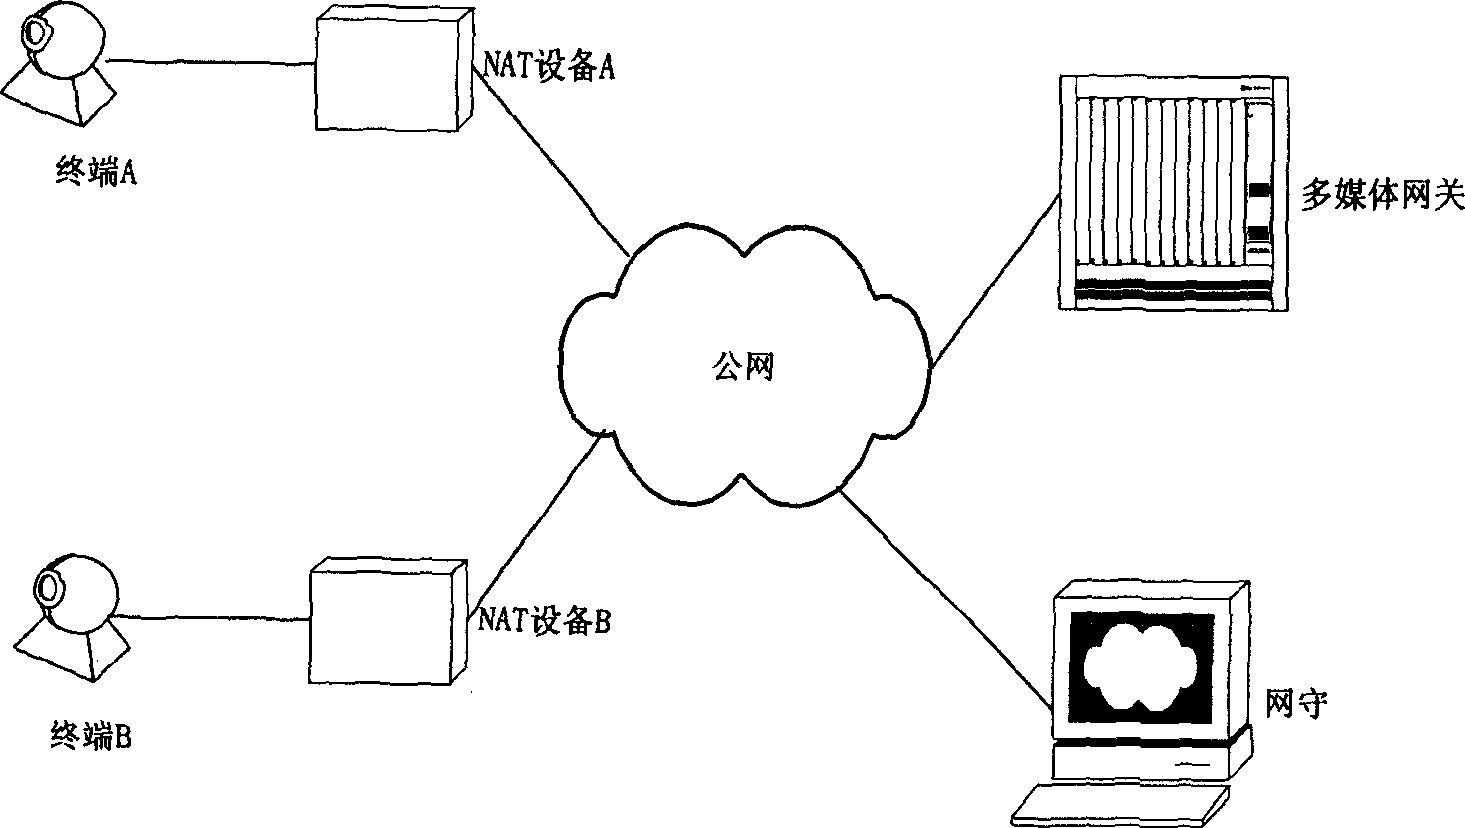 Method for multimedia terminal point-to-point call inside two private networks